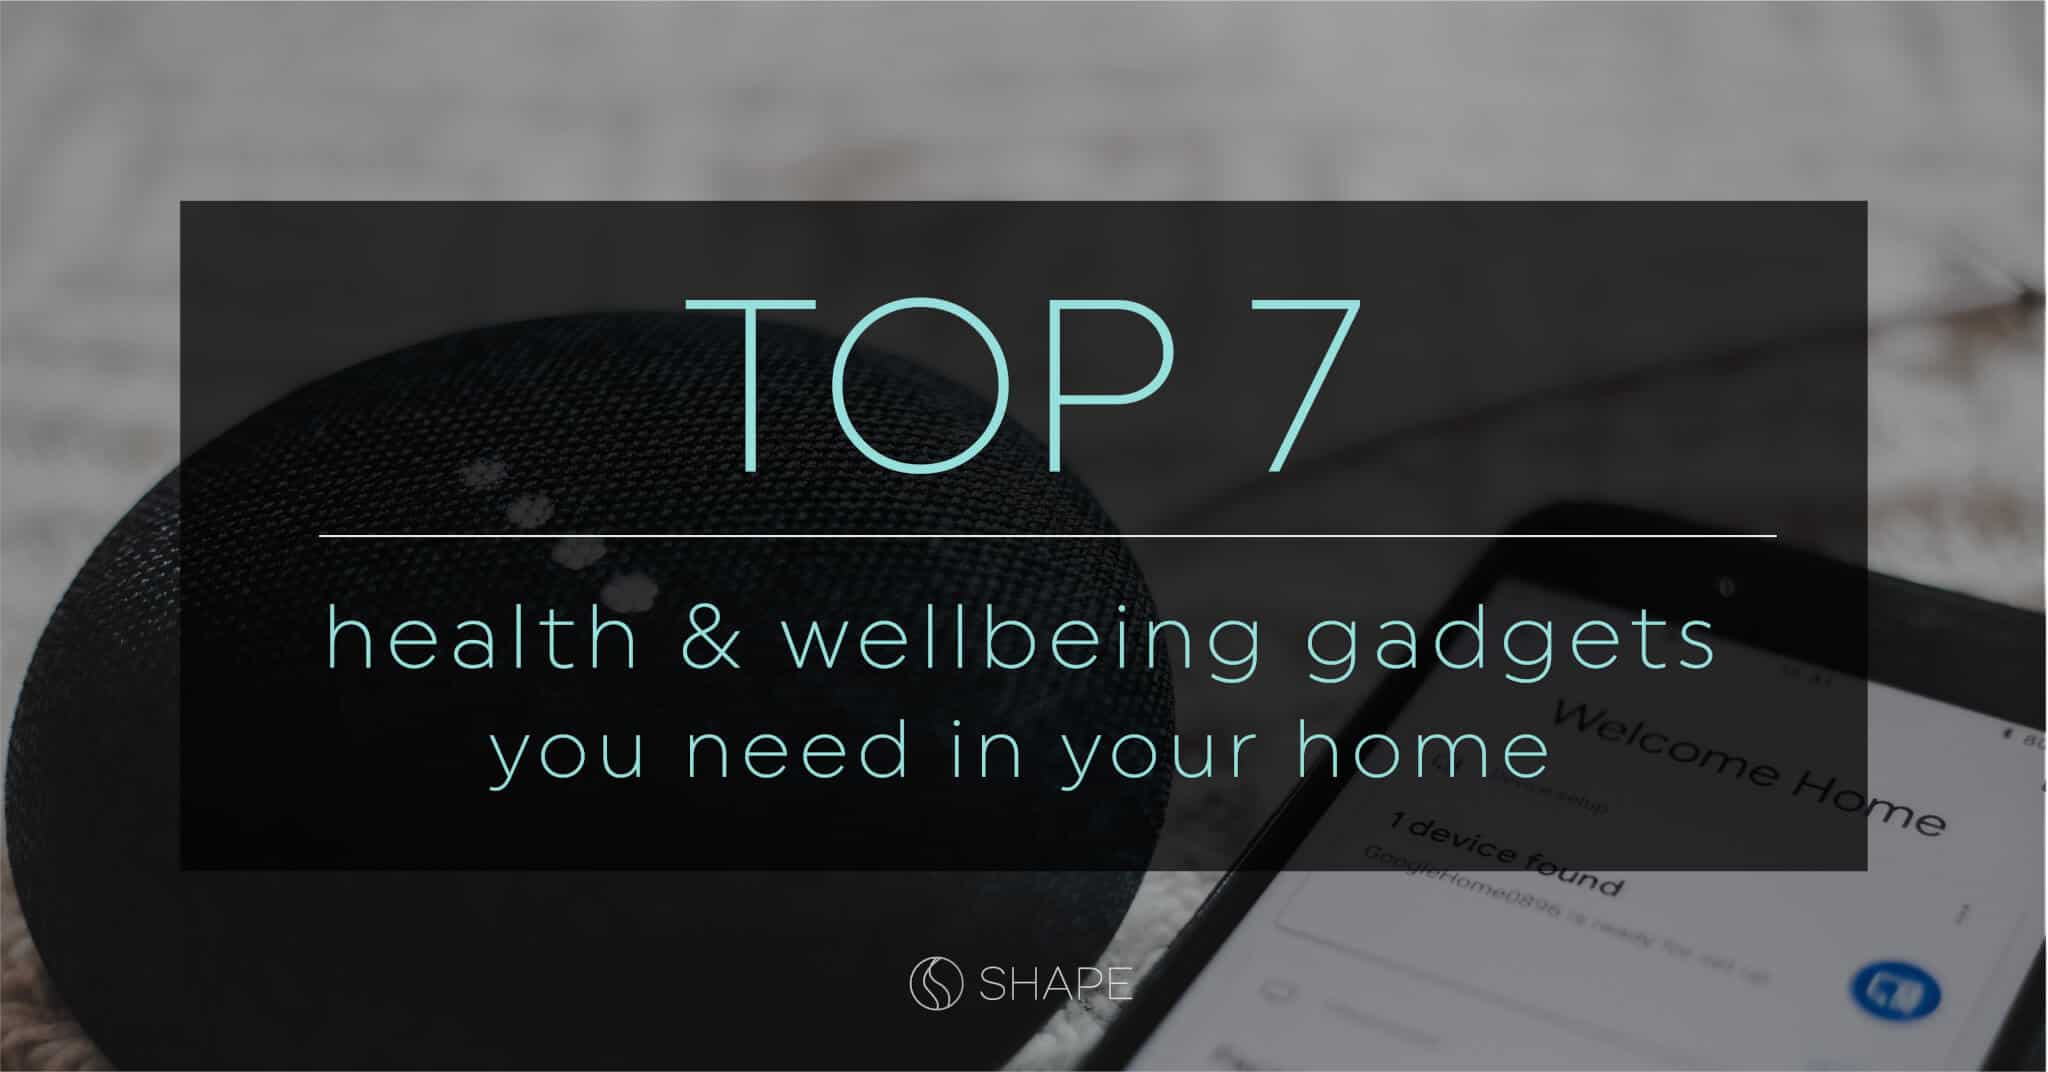 4 high-tech health gadgets headed your way in 2017